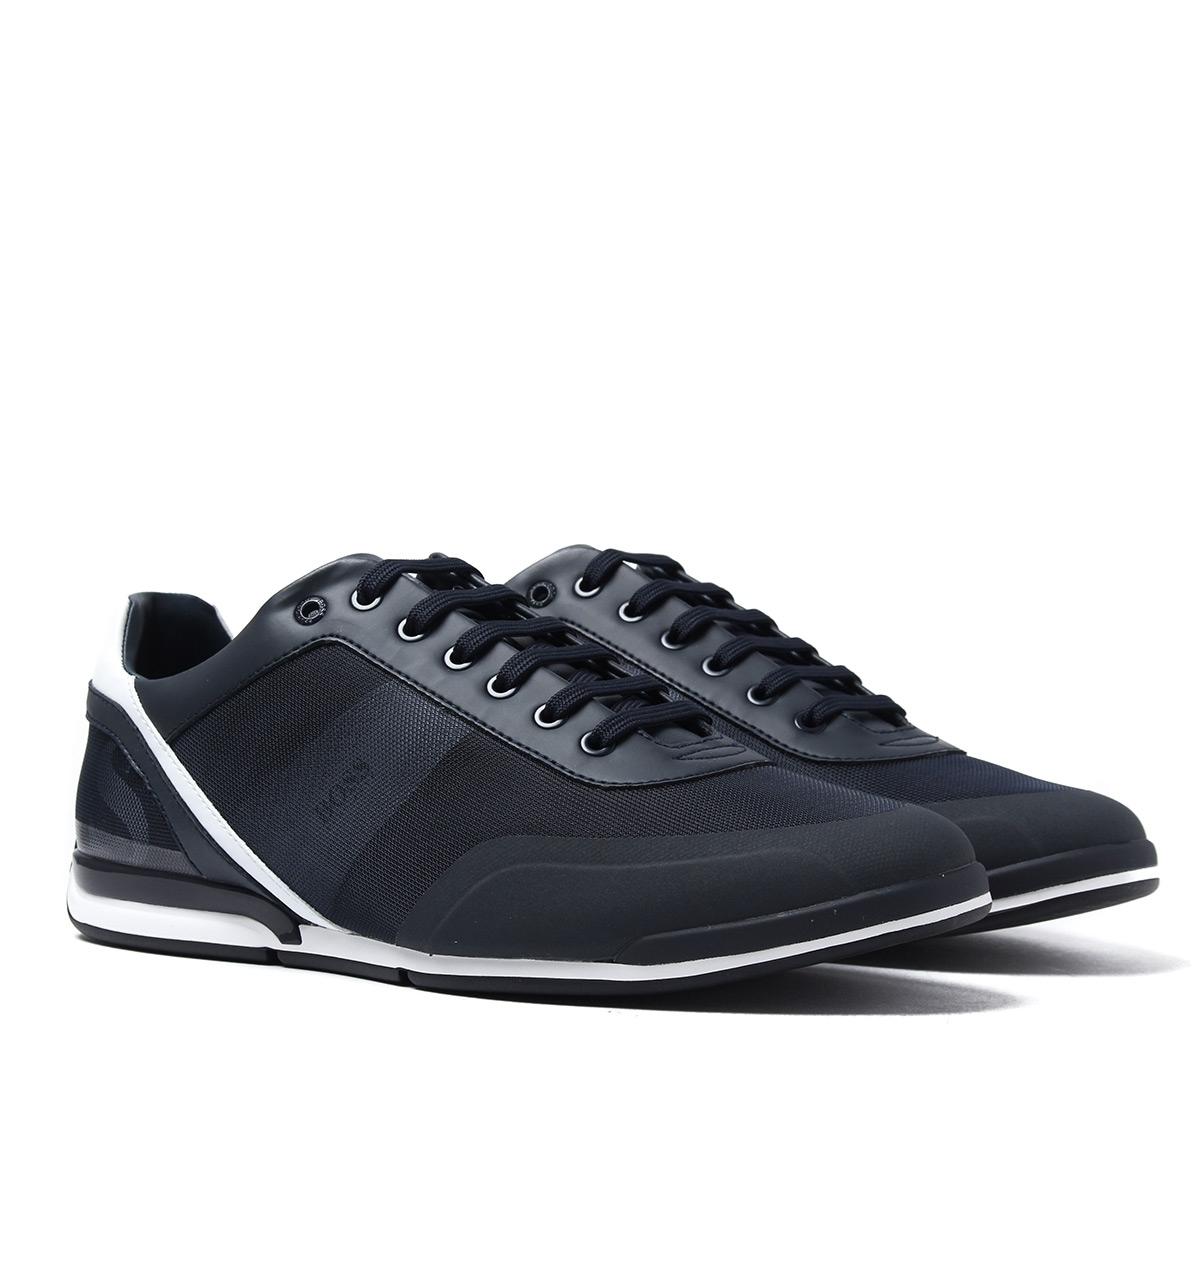 Lyst - BOSS by Hugo Boss Boss Saturn Lowp Act3 Blue Trainers in Blue ...